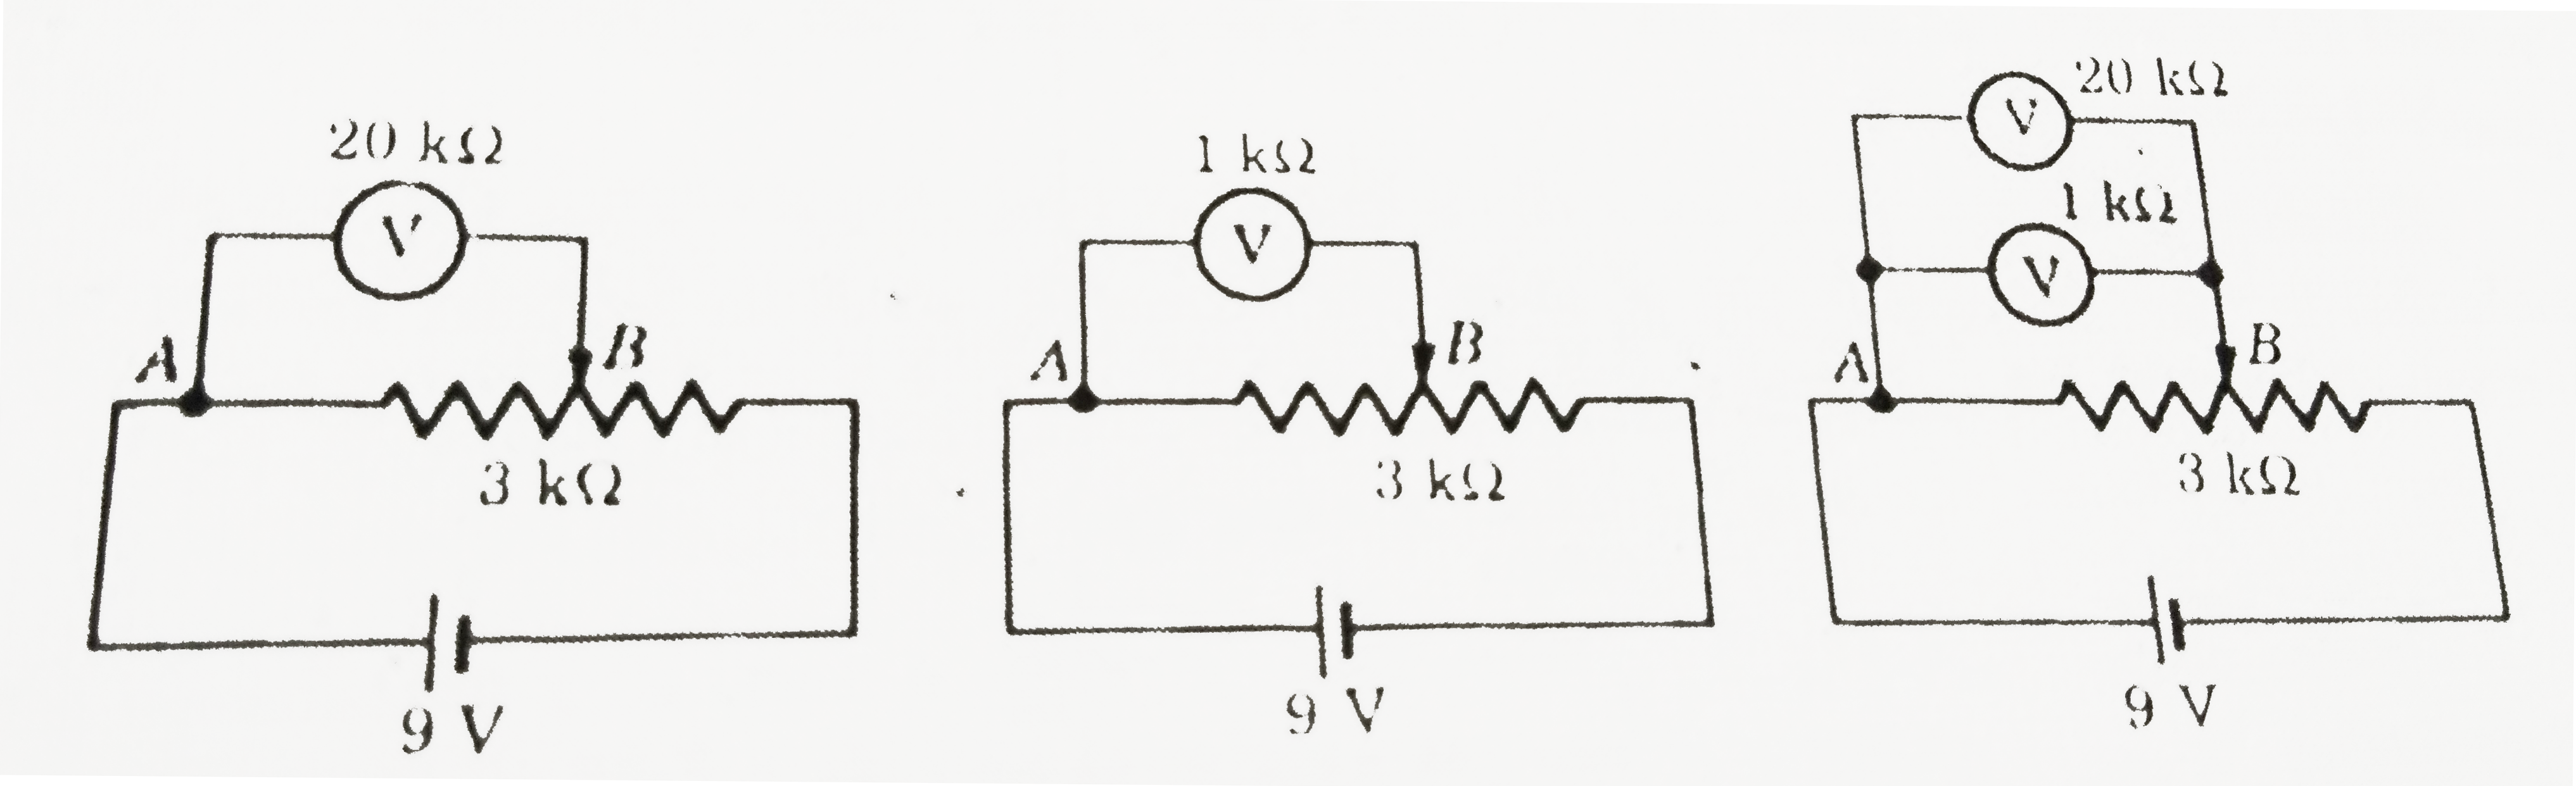 A battery of emf 9 V and negligible internal resistance is connected to a 3 k Omega resistor. The potential drop across a part of the resistor (between points A and B in the figure) is measured by (i) a 20 k Omega voltmeter, (ii) a 1 k Omega voltmeter. in (iii). both the voltmeter are connected across AB. in which case would you get the (a) highest, (b) lowest reading?